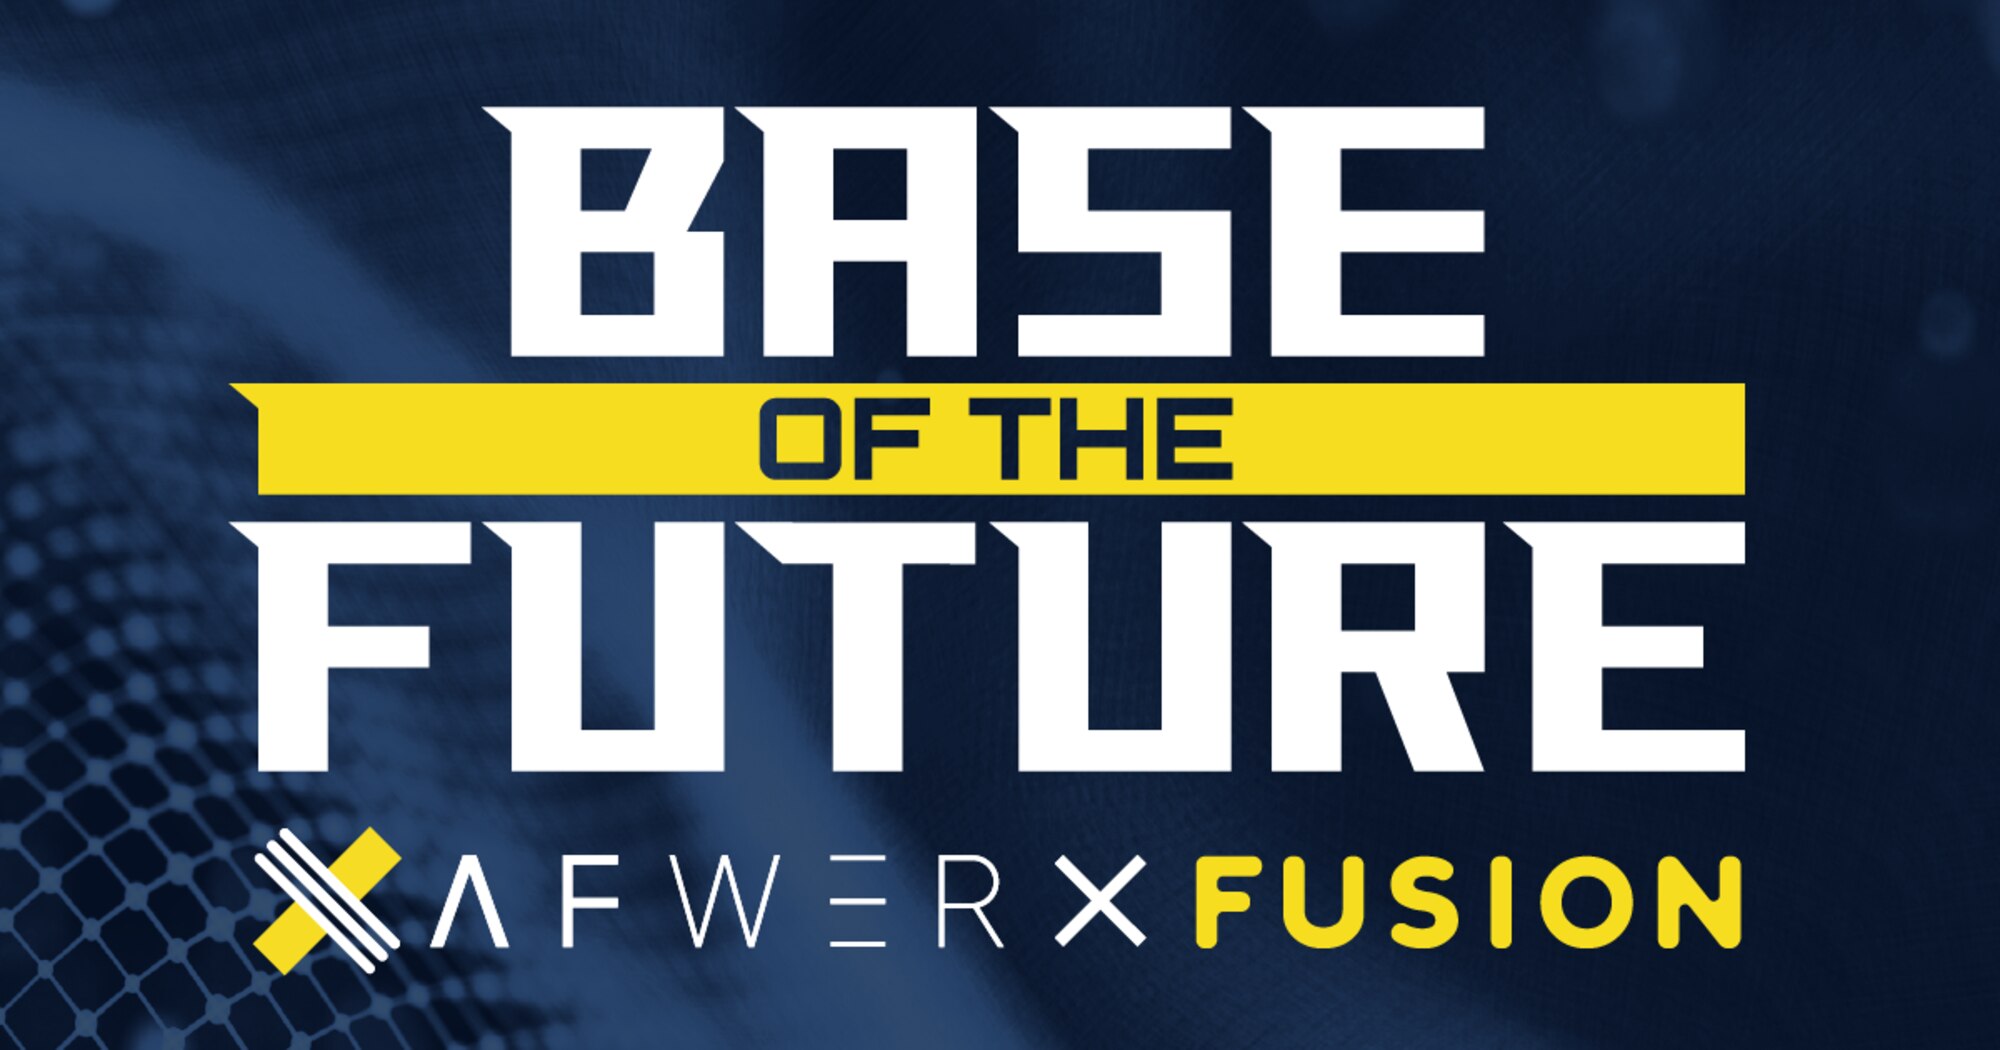 AFWERX, the U.S. Air Force’s innovation arm and catalyst for fostering innovation within the Air Force, announced registration is now live for the AFWERX Fusion 2020 Base of the Future virtual event, July 28 to 30. The event will feature more than 300 teams from the public and private sector participating in the Base of the Future Showcase to present their innovative solutions to Air Force leadership and key military decision-makers and operators. (AFWERX courtesy graphic)